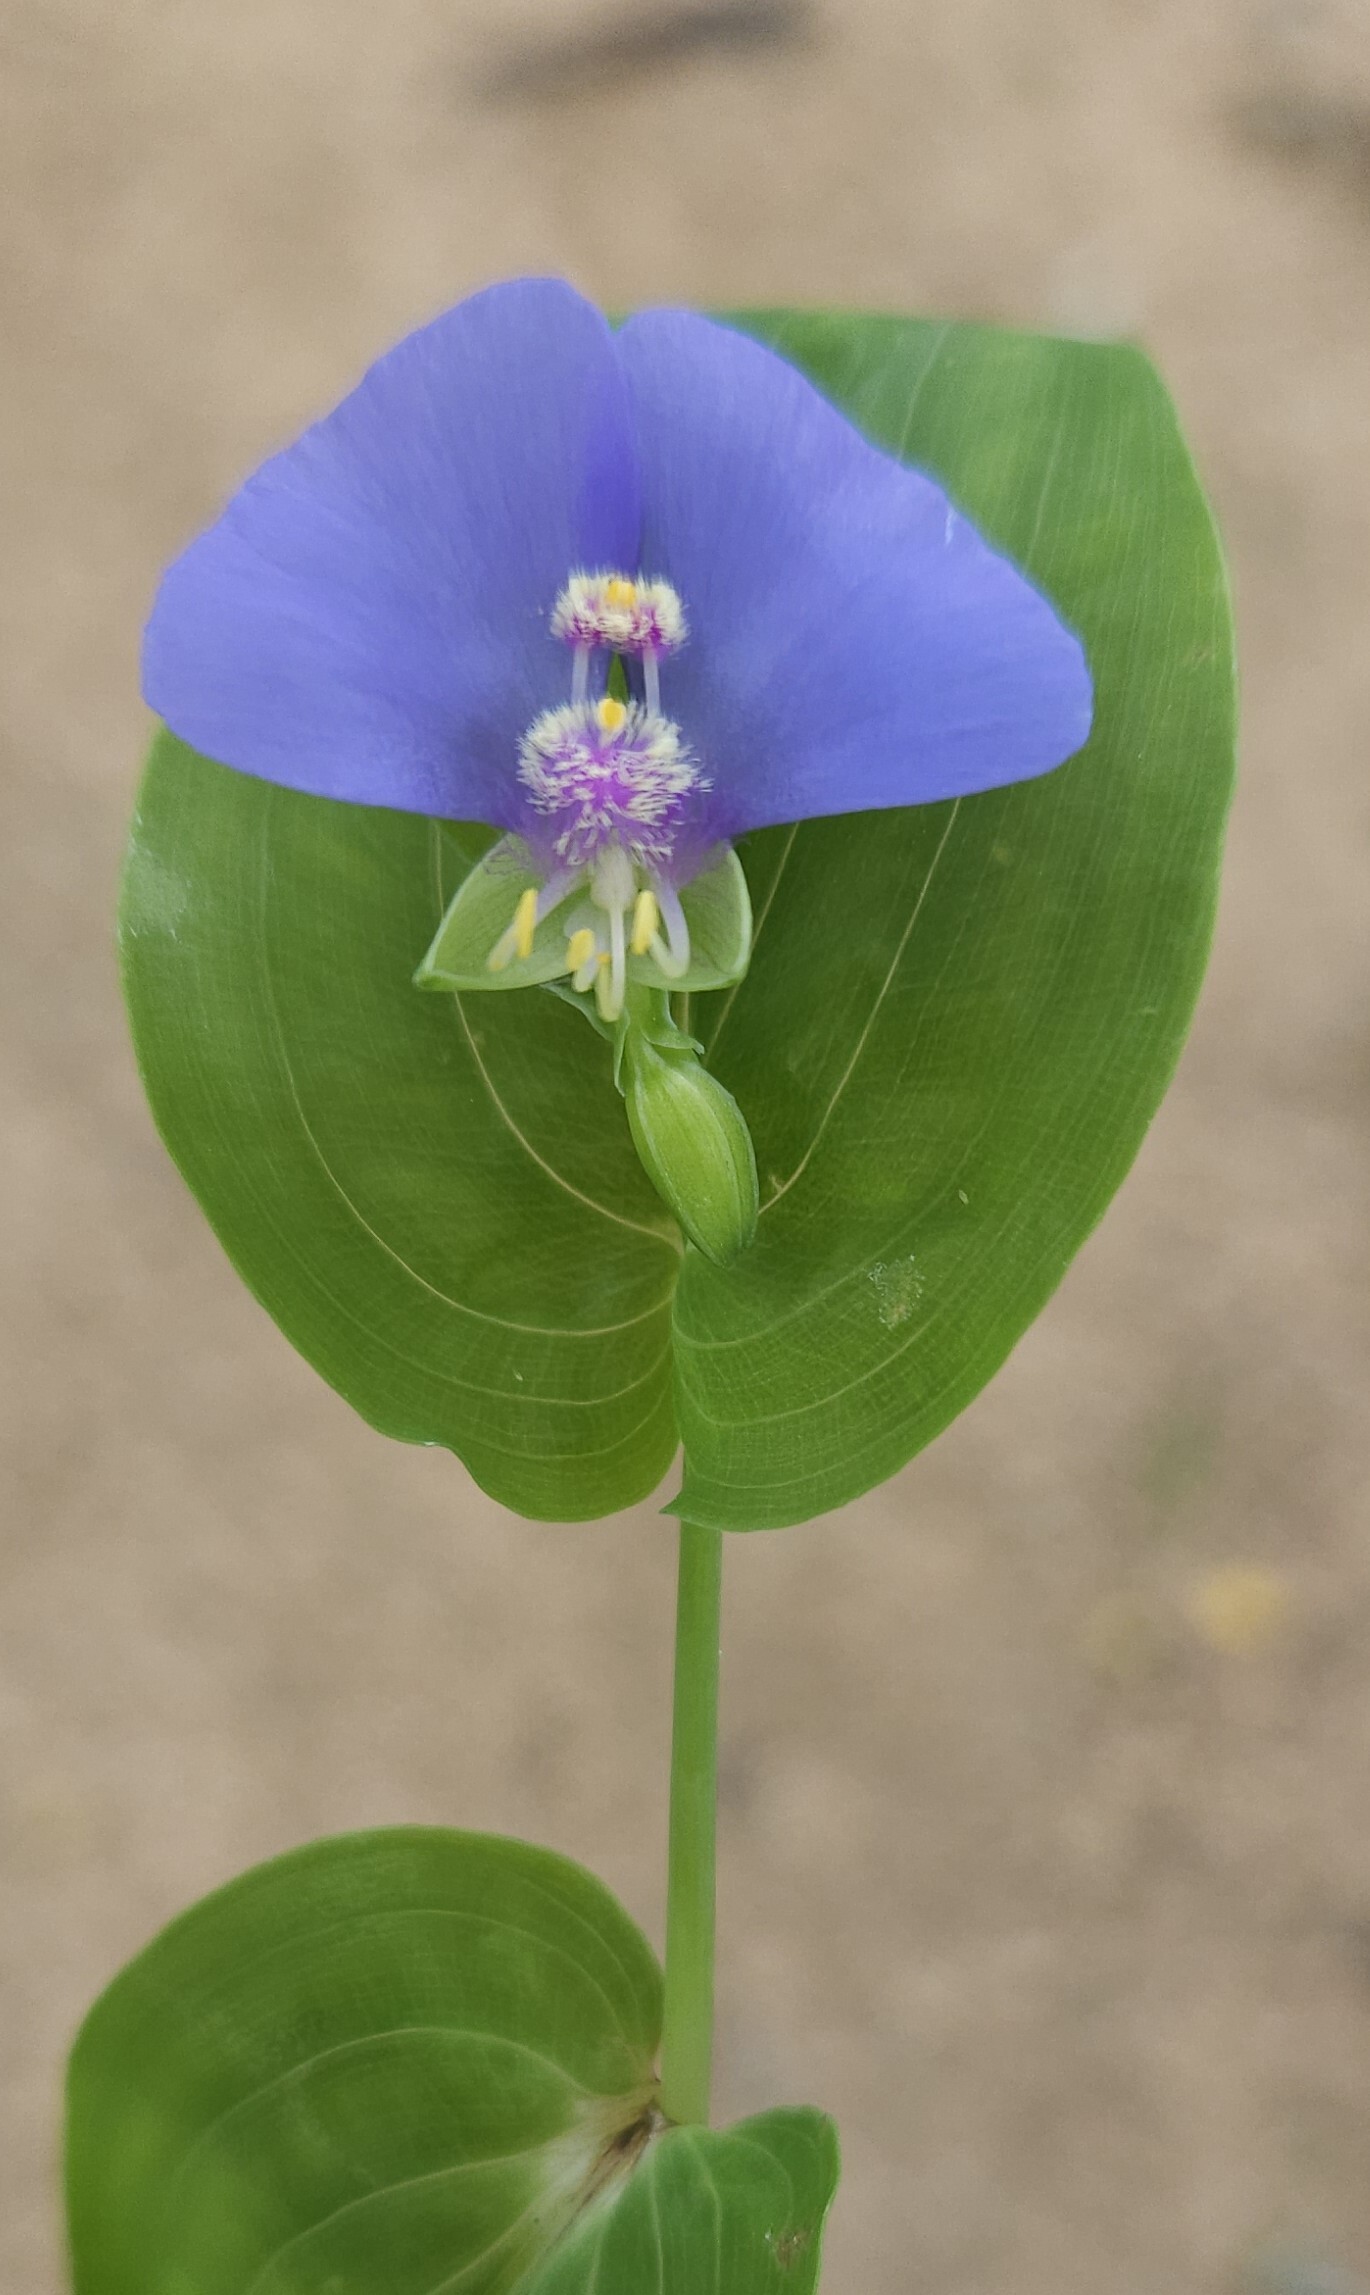 image of a violet widow's tears flower